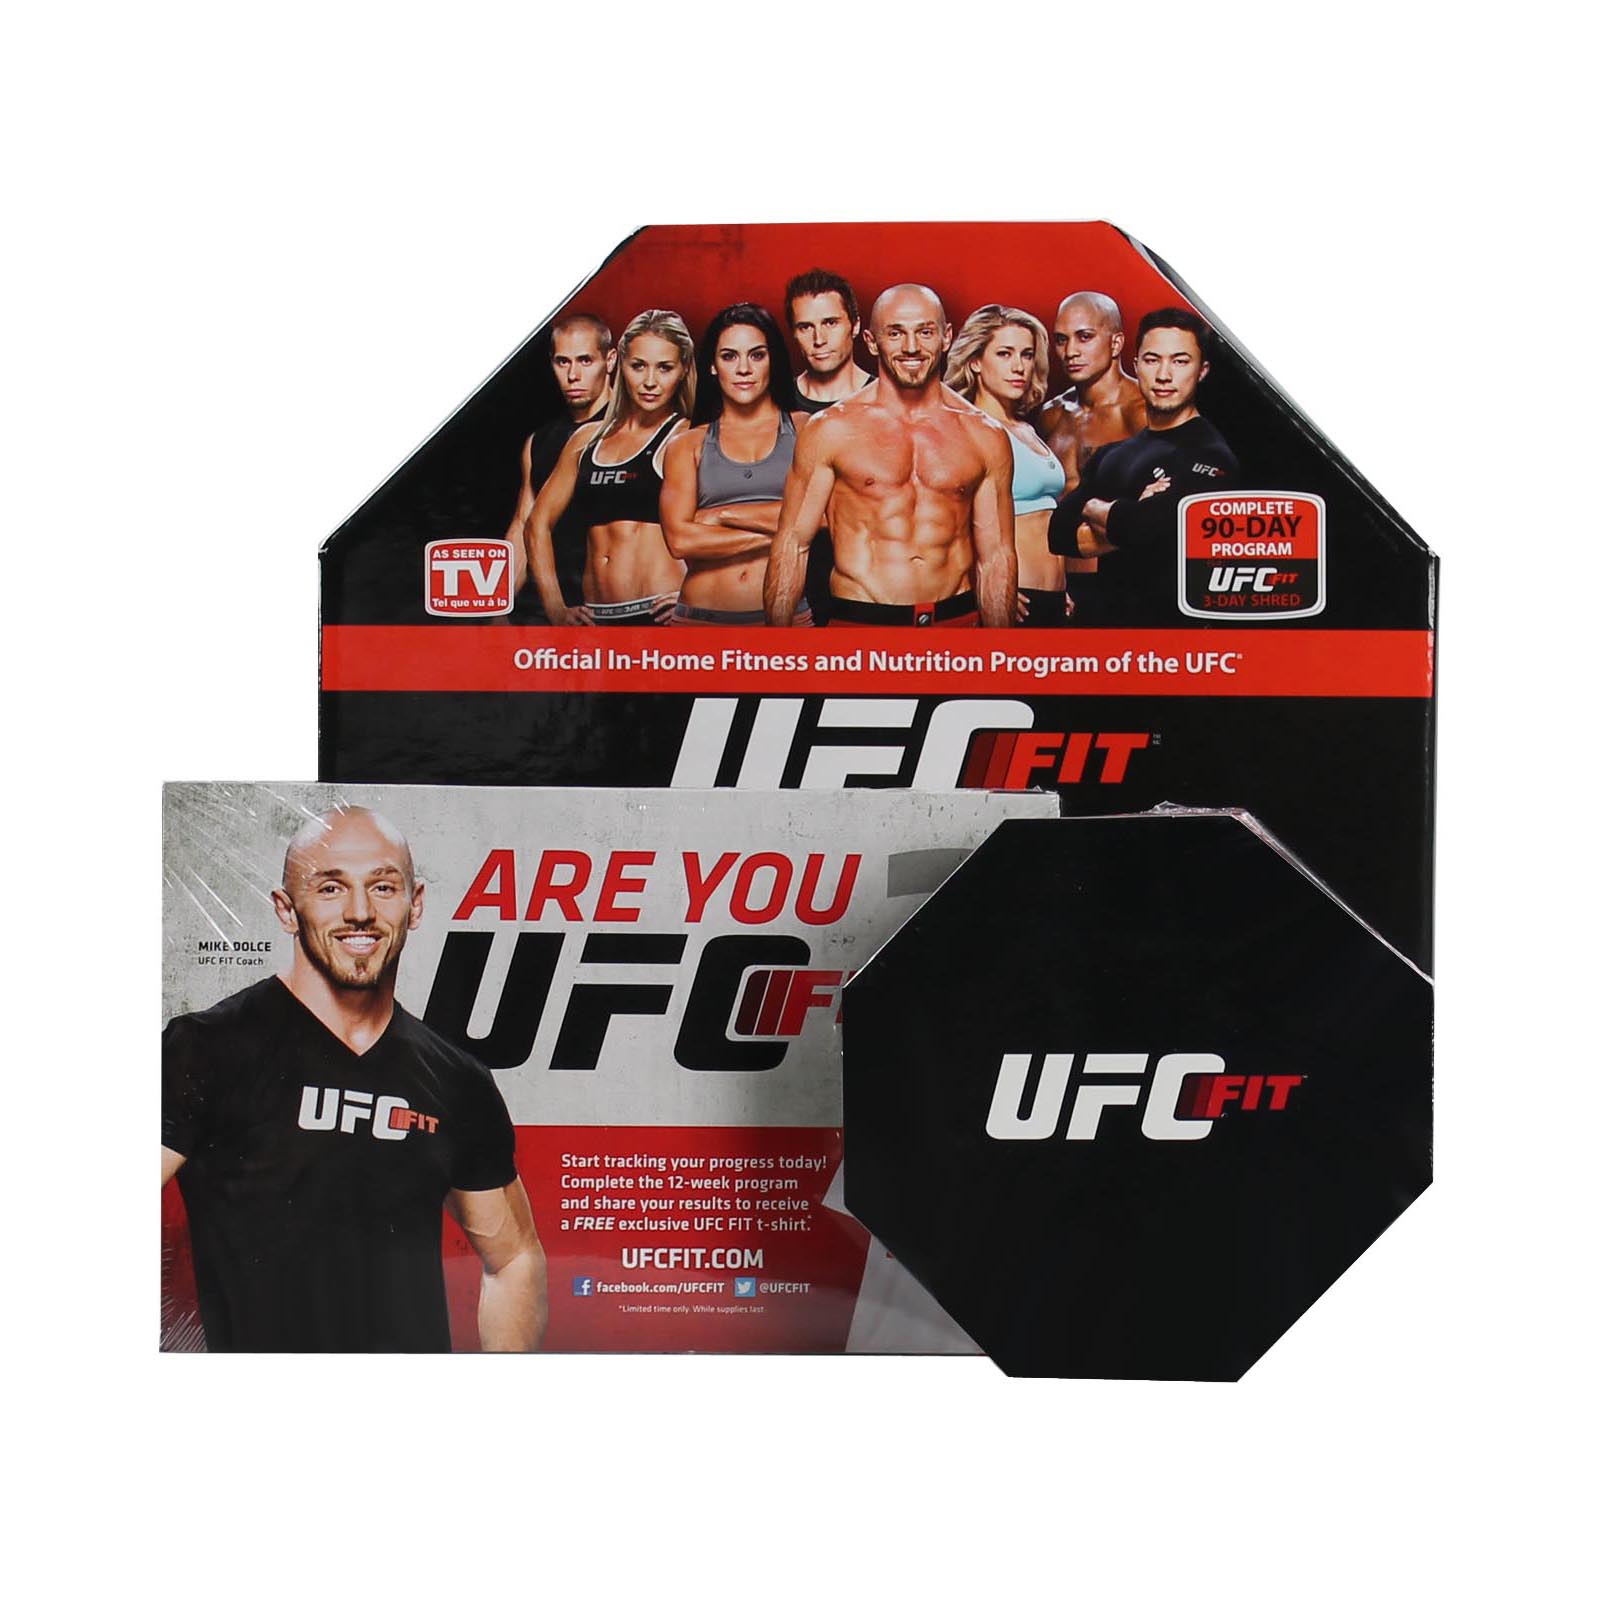  Ufc Fit Workout Dvd for Build Muscle